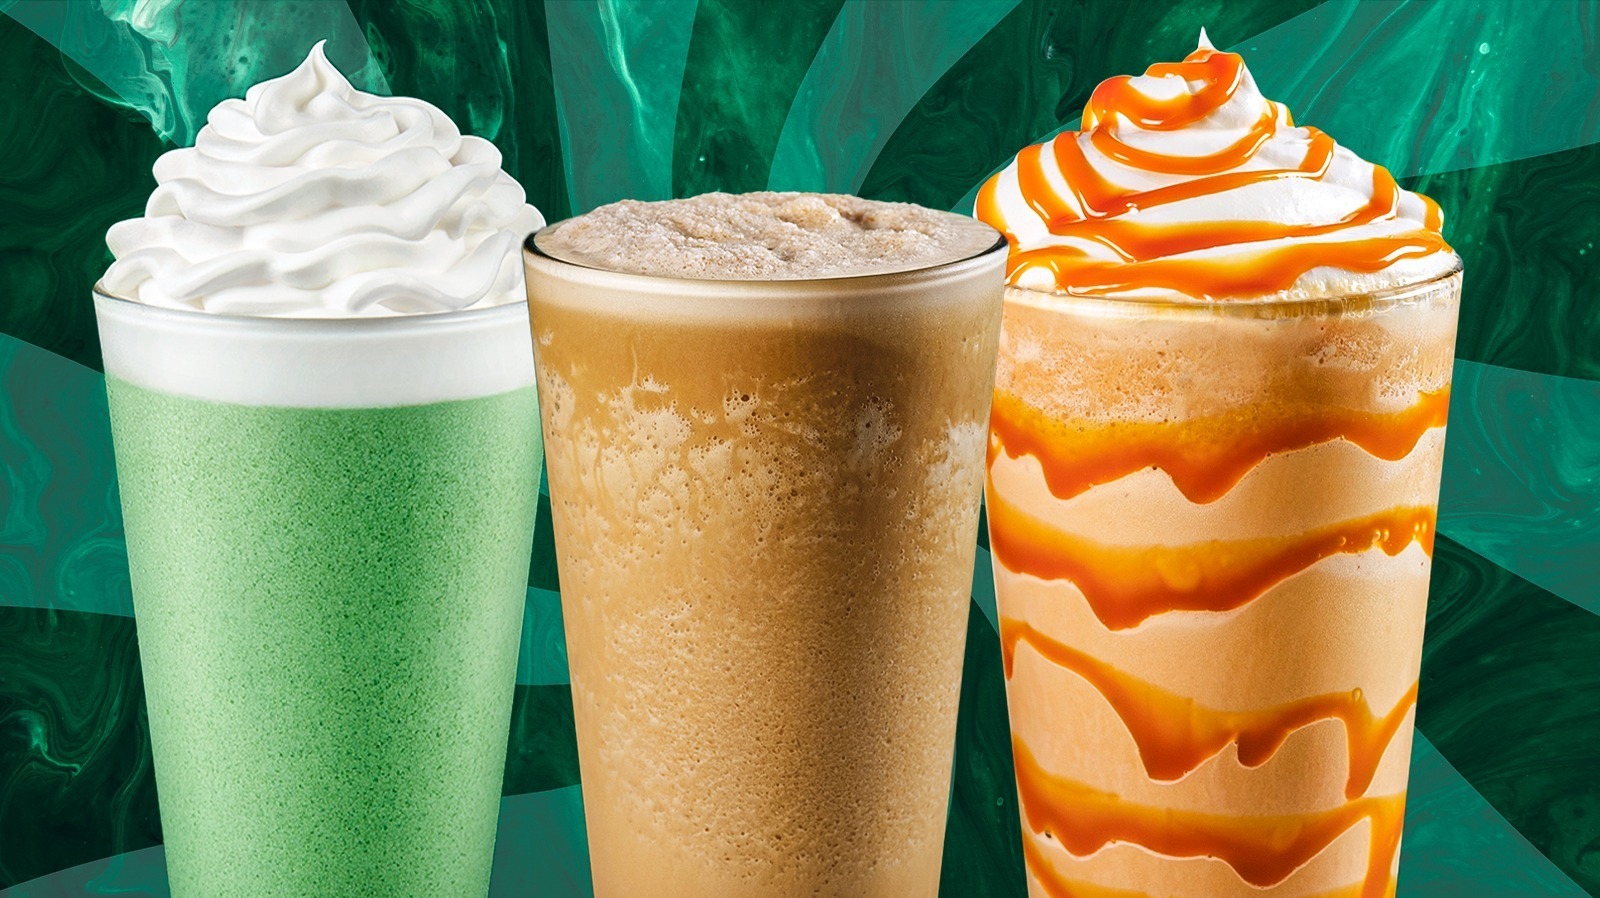 https://www.tastingtable.com/img/gallery/the-absolute-best-starbucks-frappuccinos-ranked/l-intro-1697049375.jpg